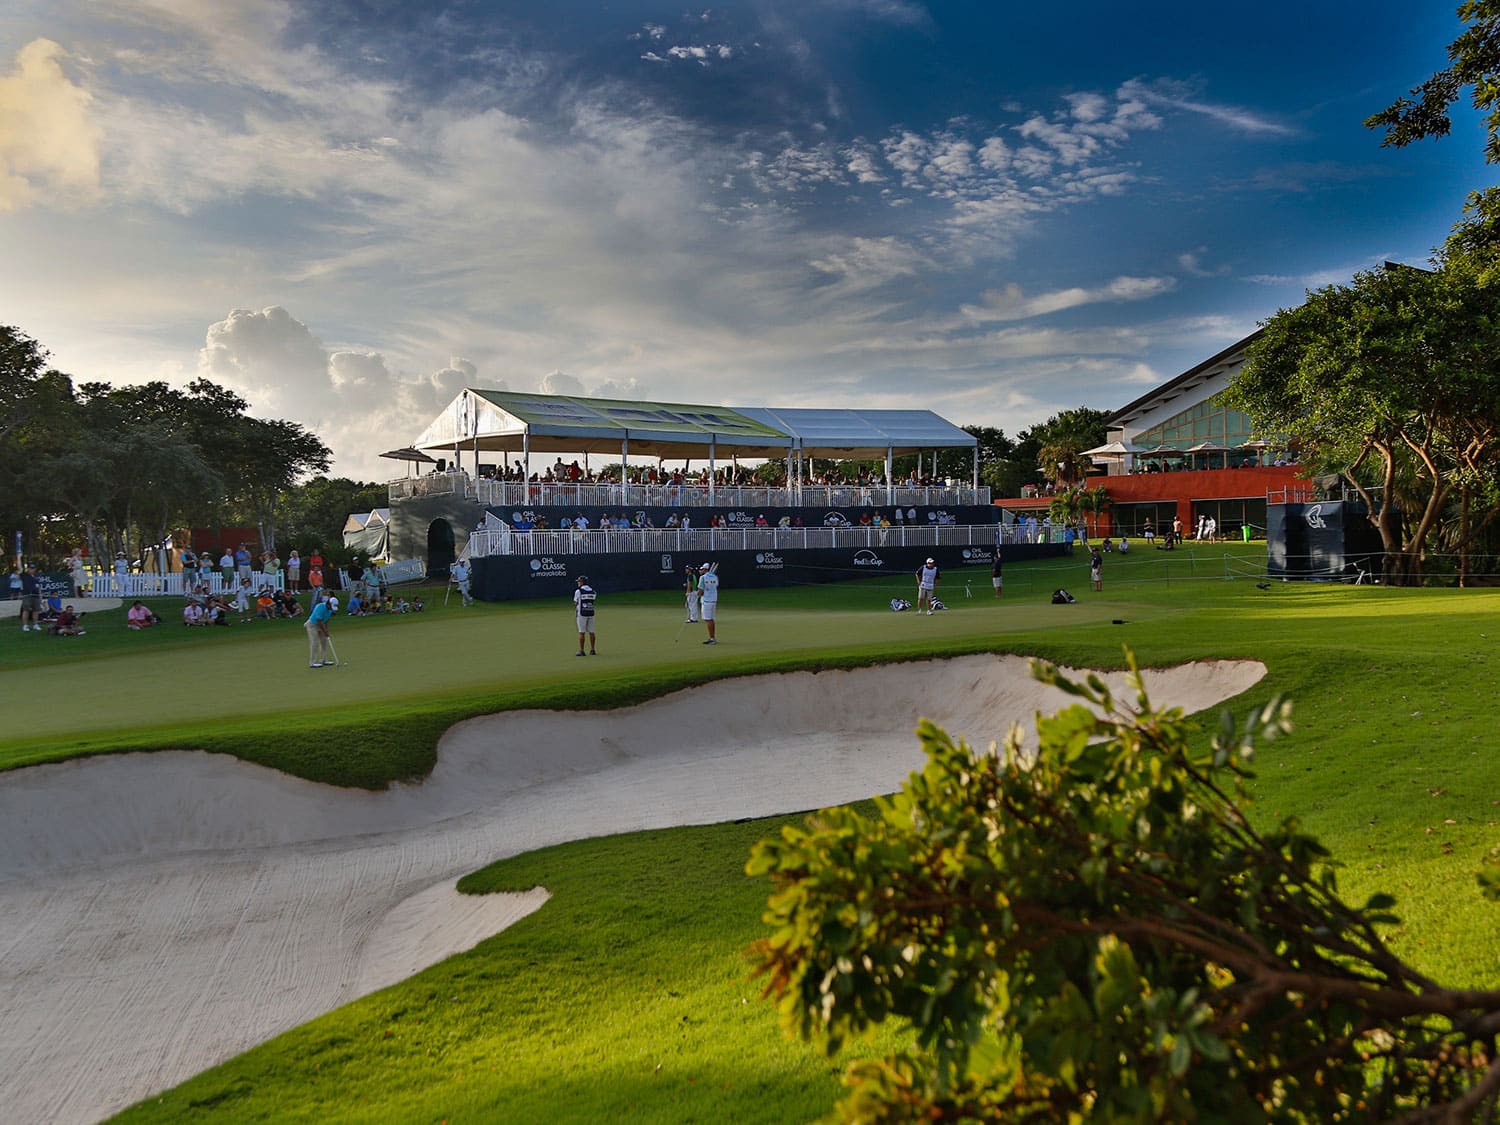 The OHL Mayakoba Classic is one of several events hosted at the Greg Norman-designed El Camaleon golf course.